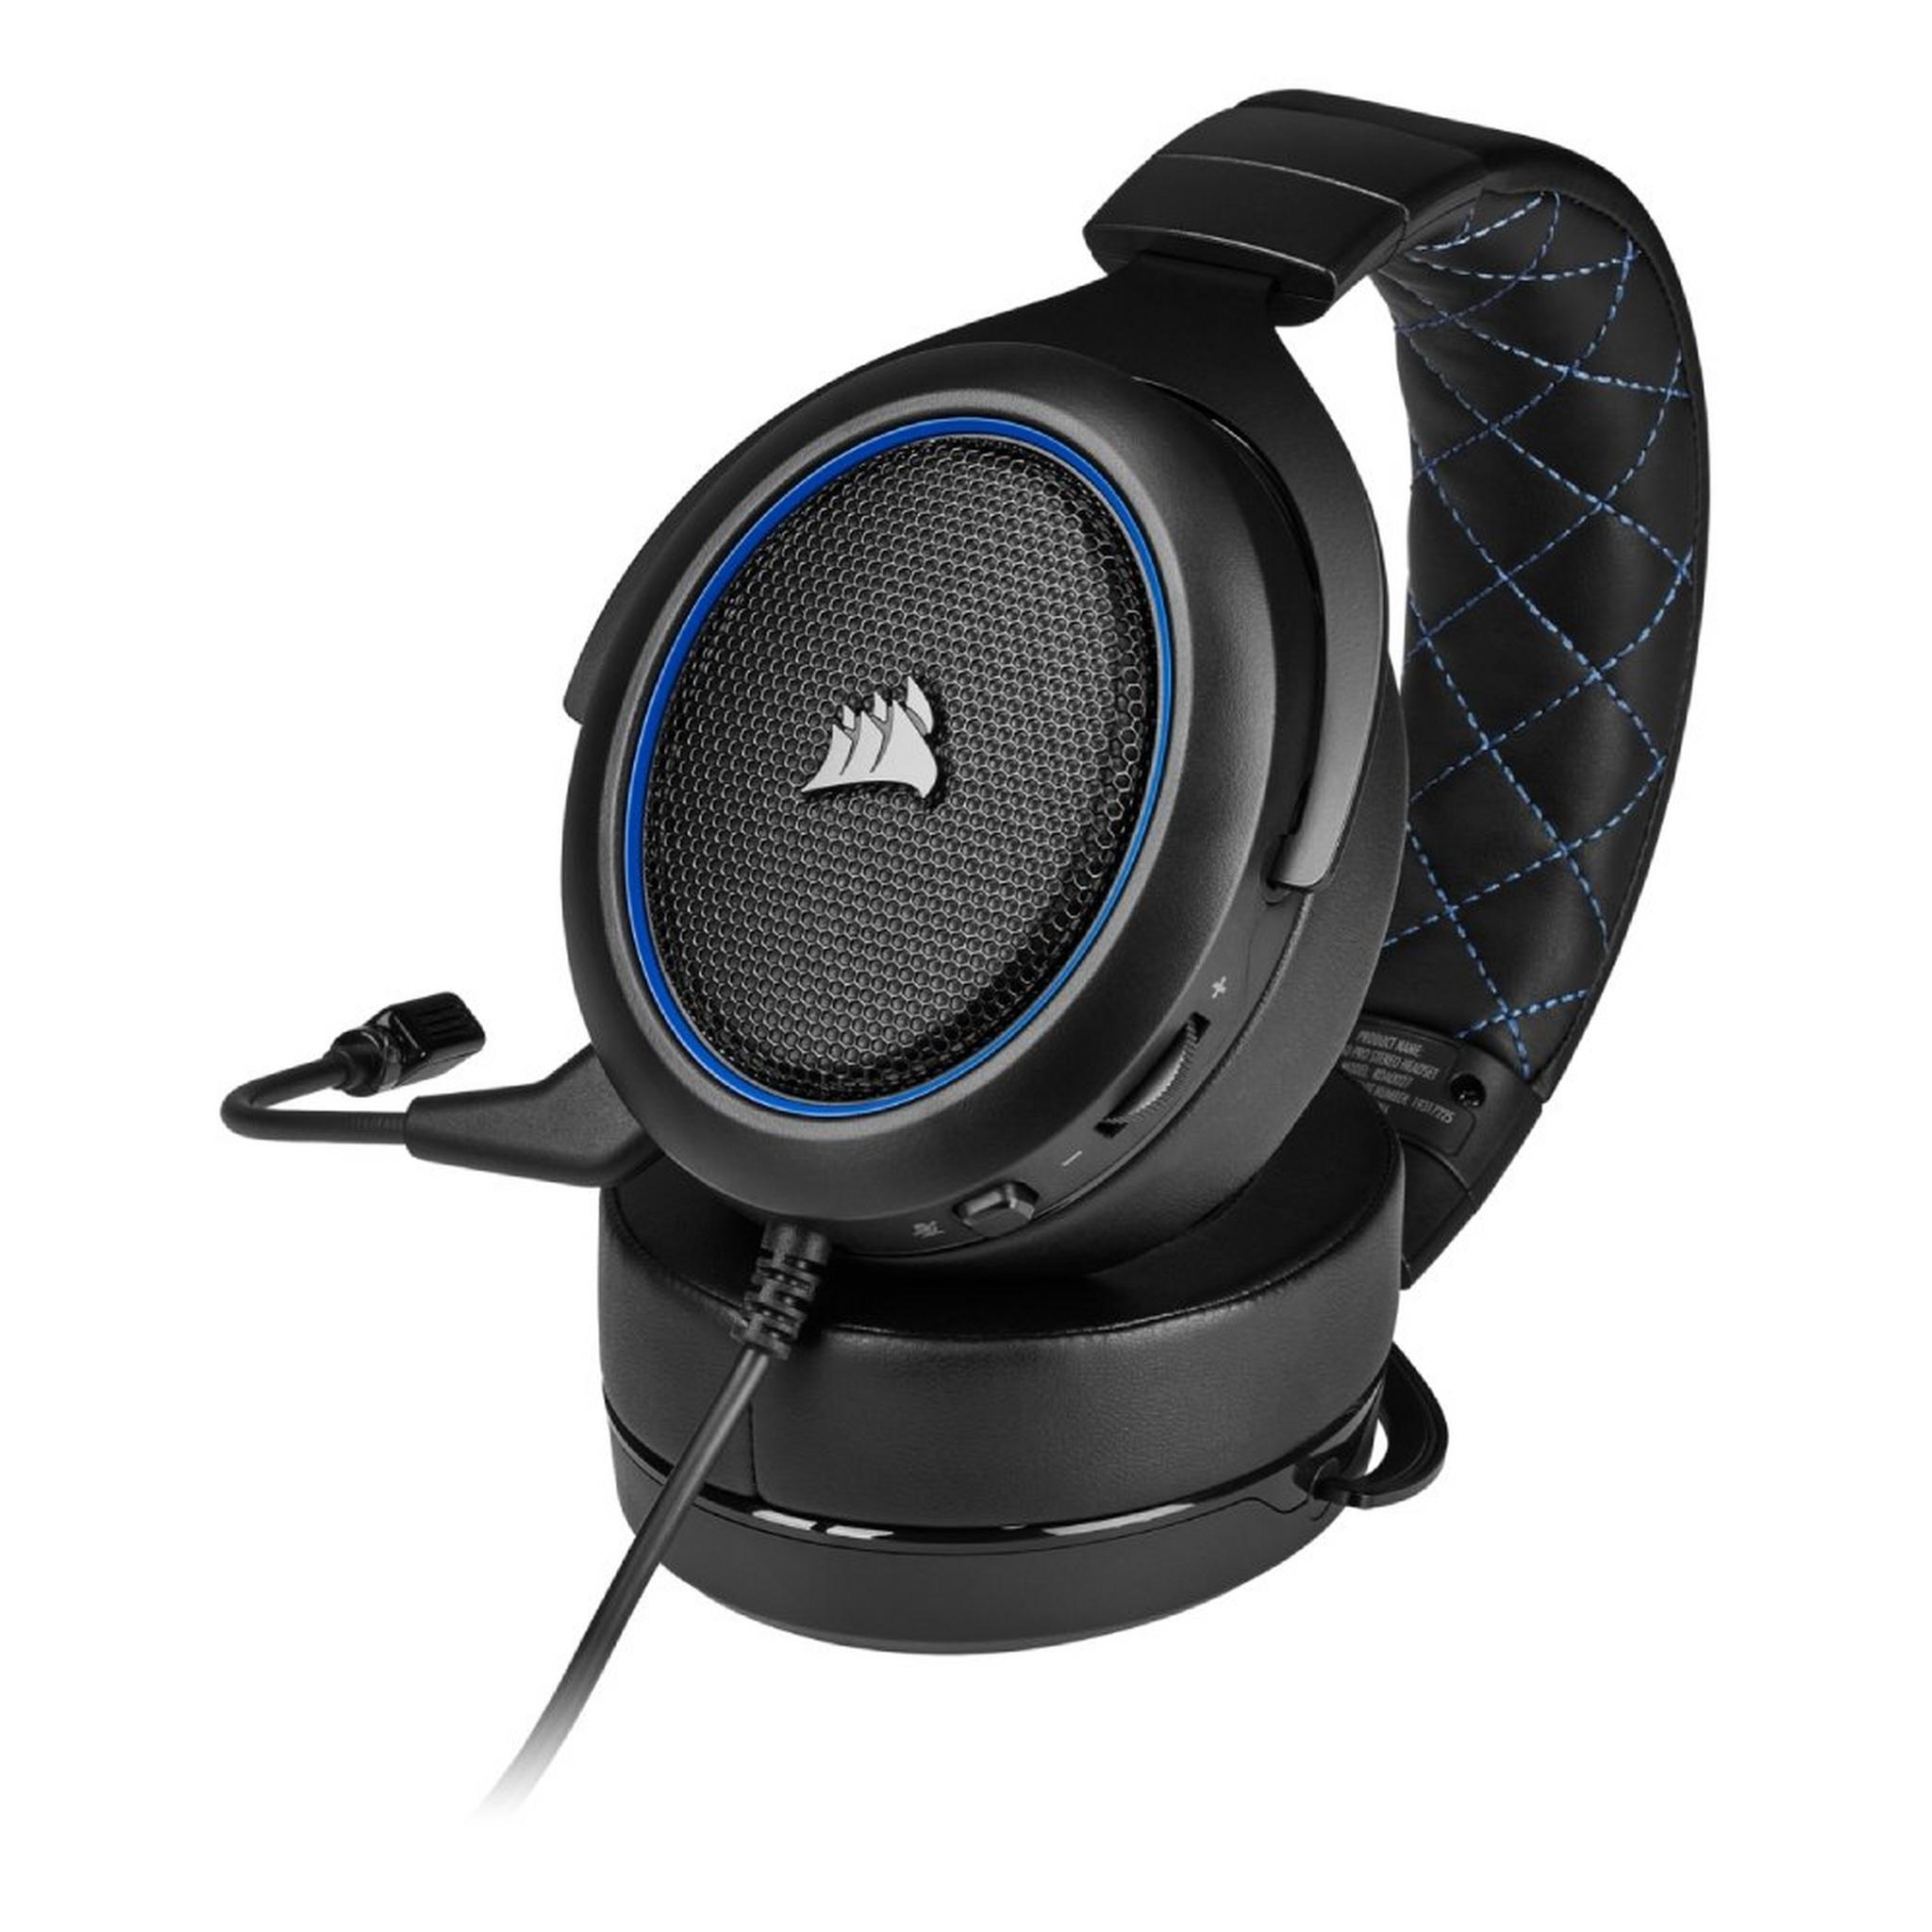 Corsair HS50 Pro Stereo Wired Gaming Headset - Blue